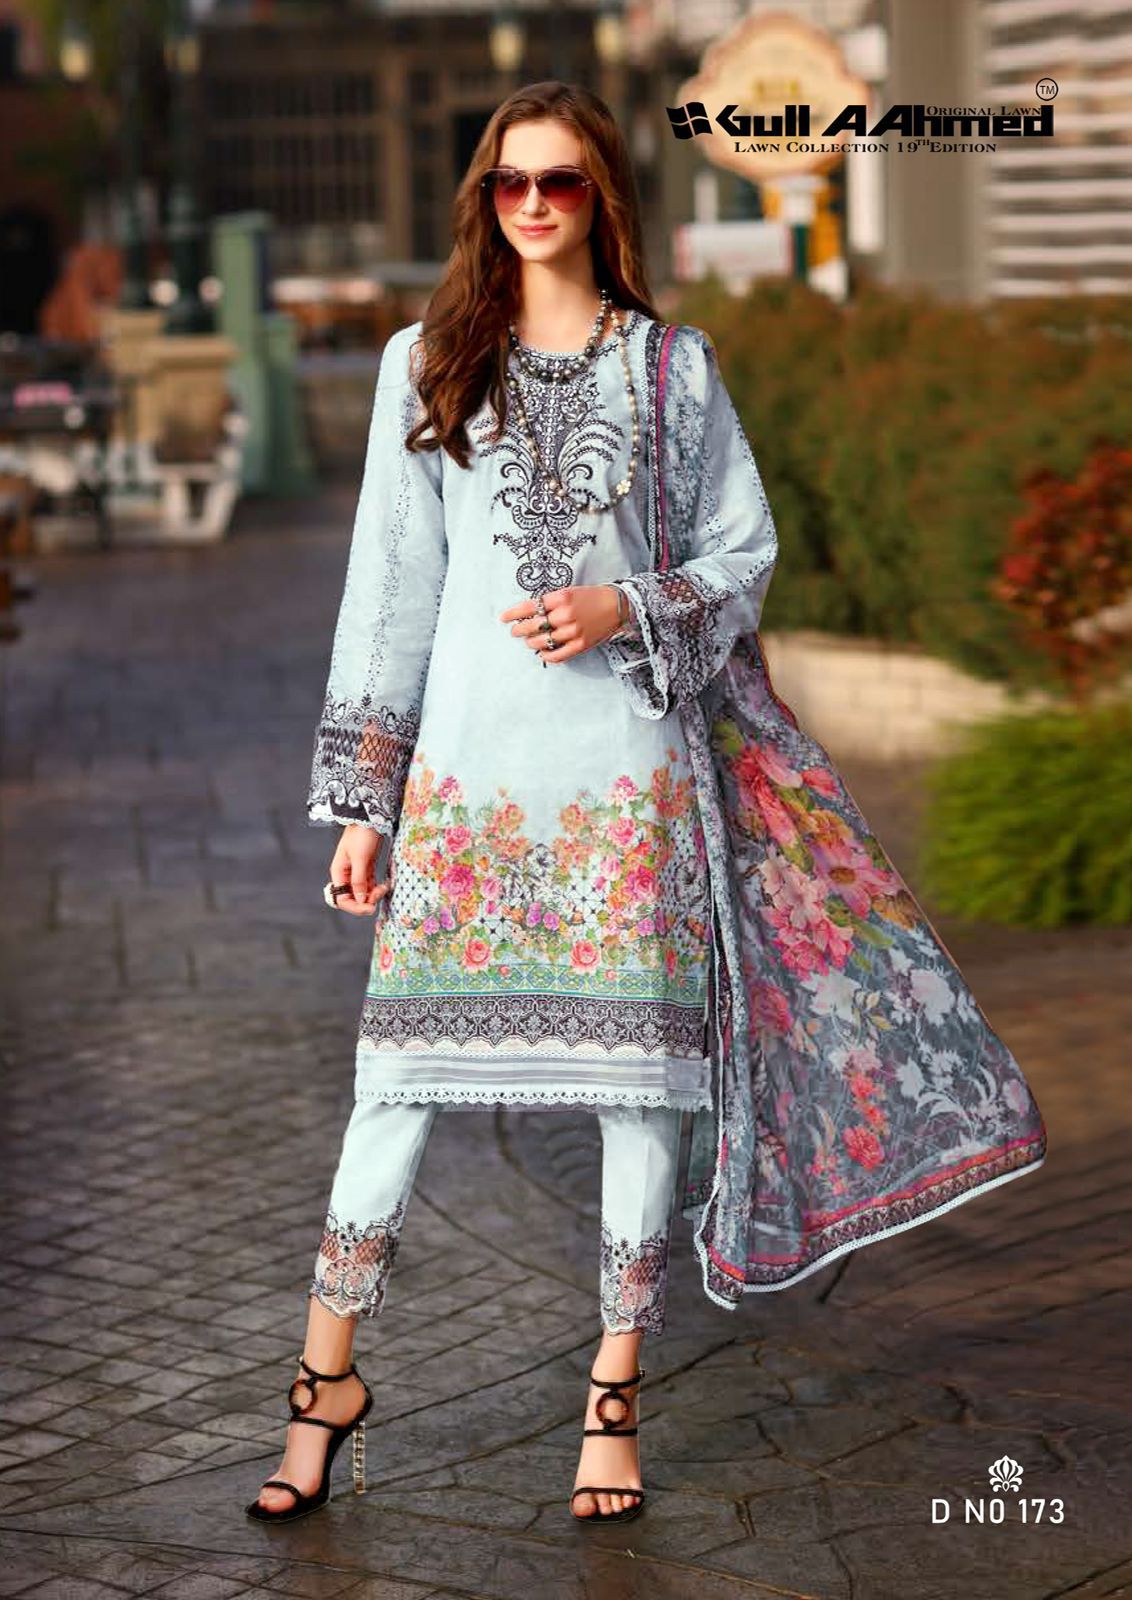 GULL AAHMED VOL 19 LAWN COLLECTION